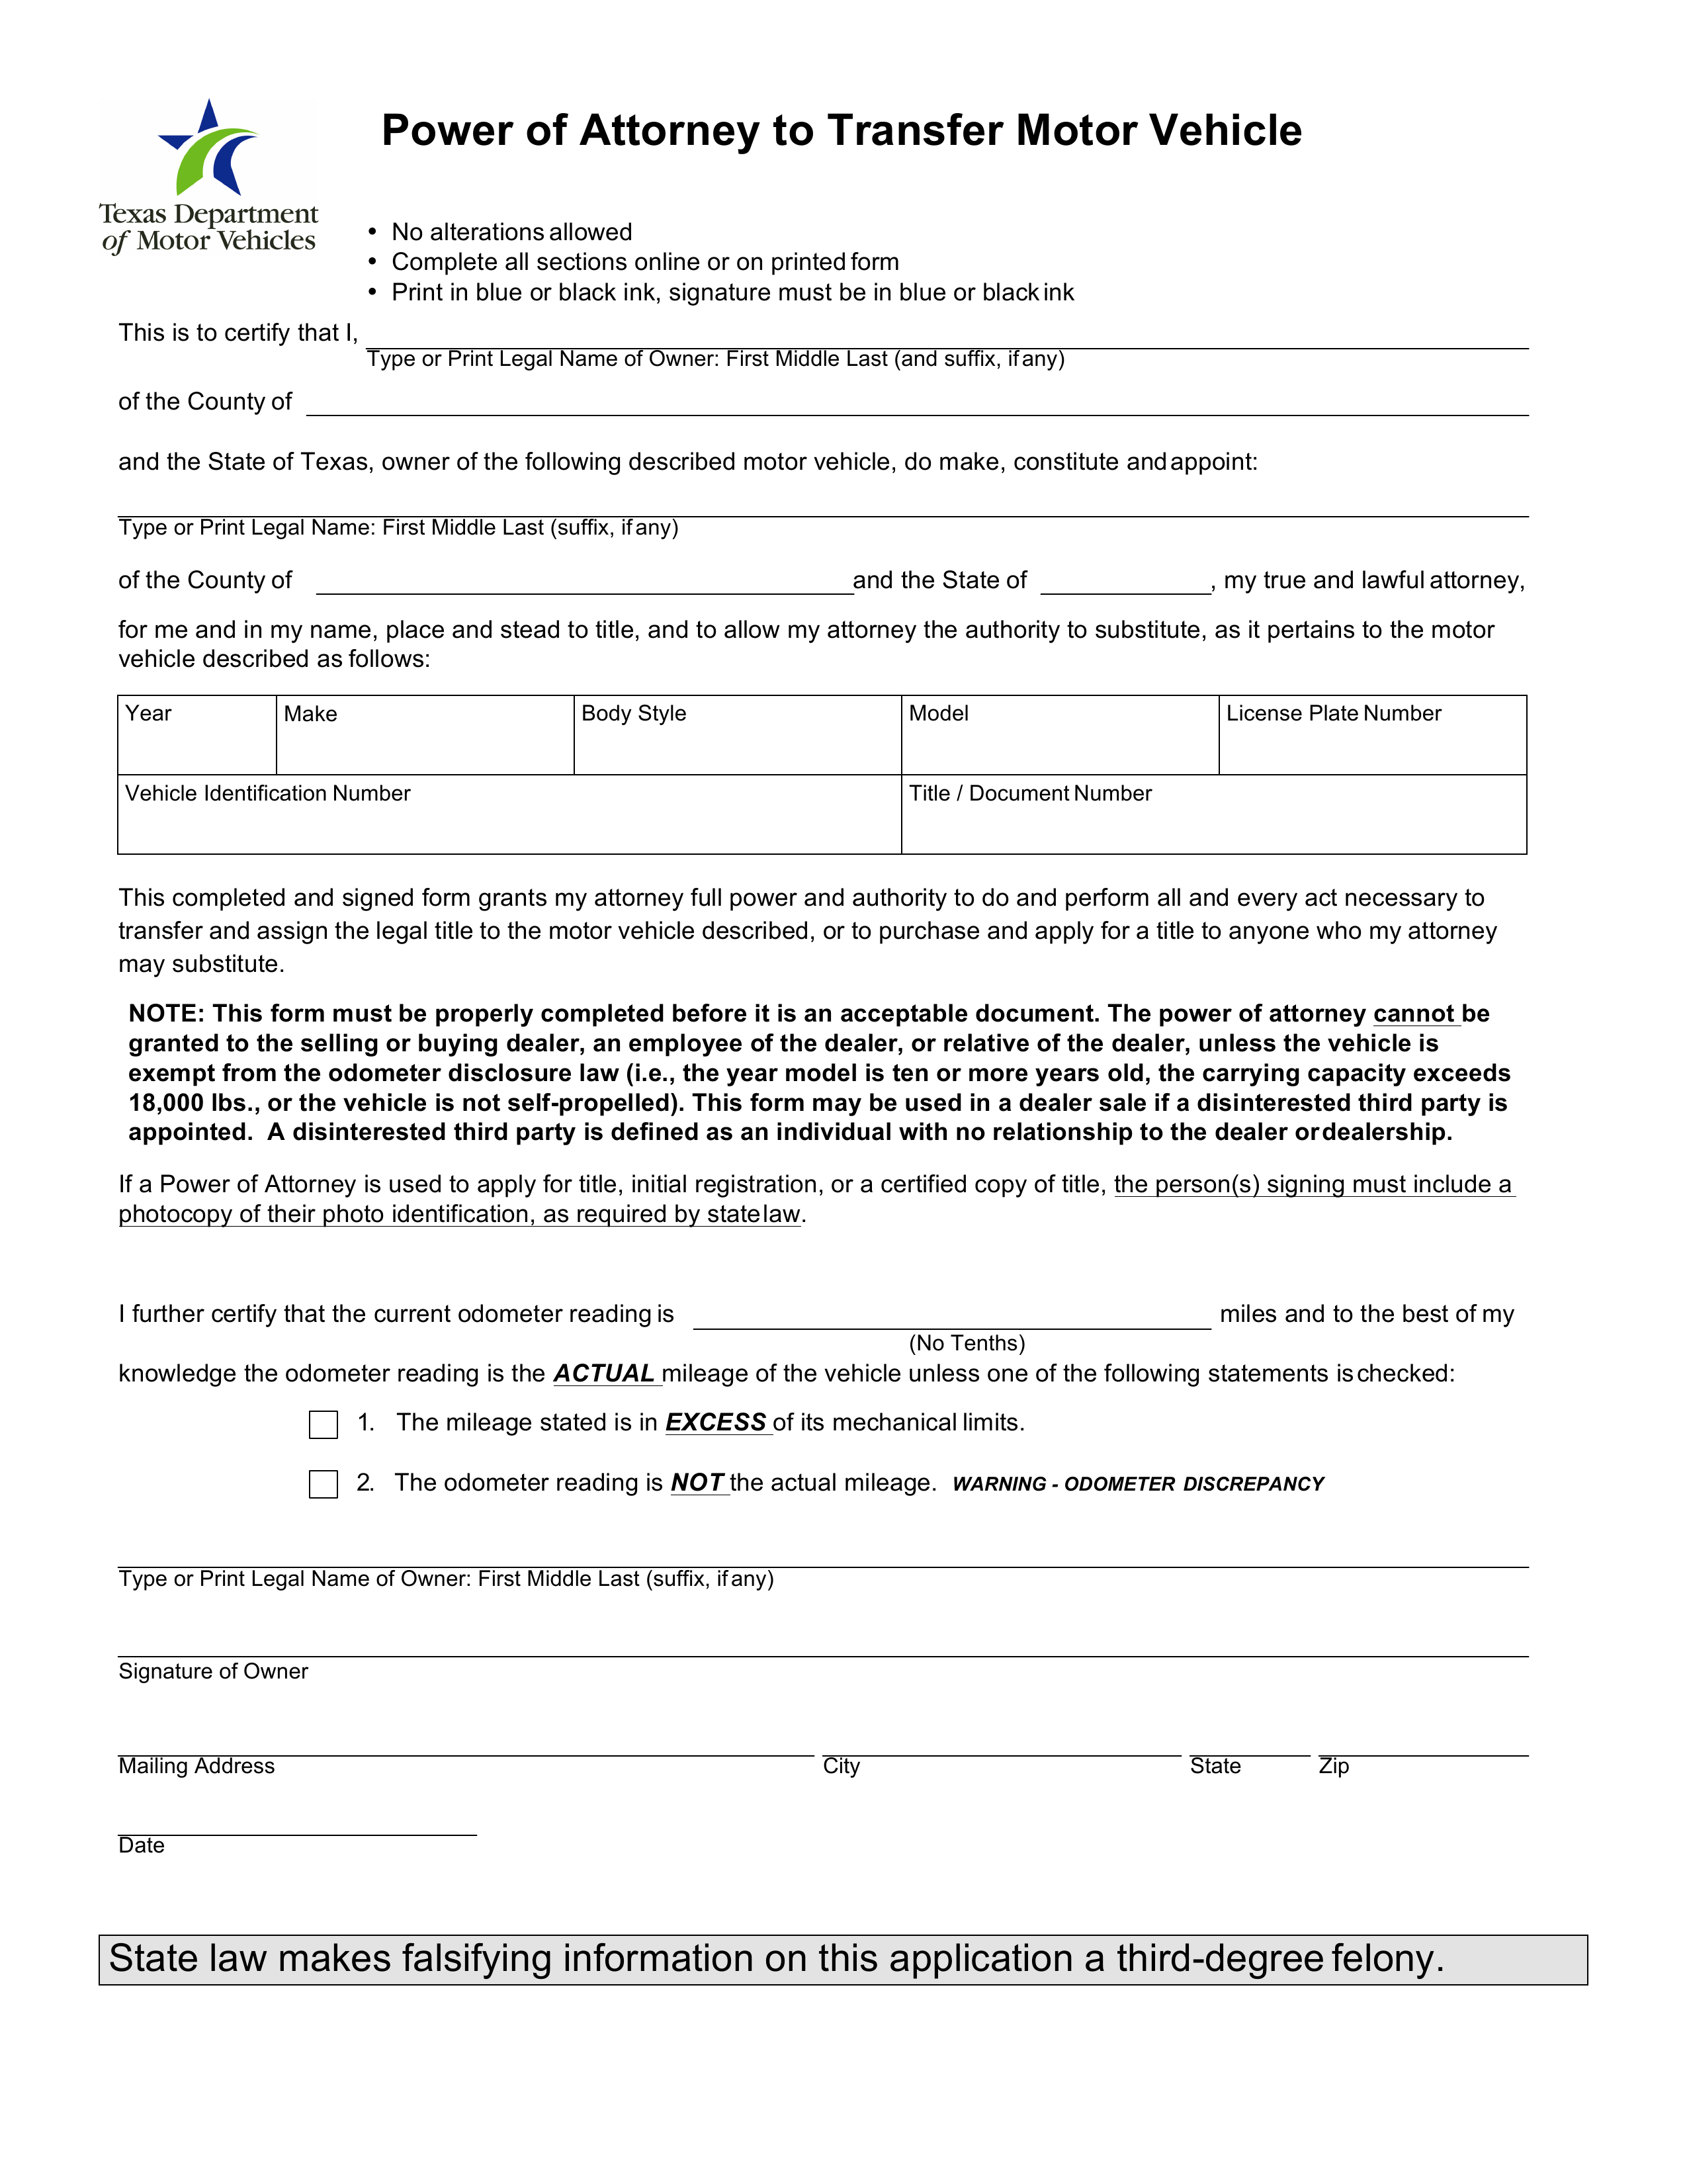 Texas Motor Vehicle Power of Attorney (Form VTR-271)